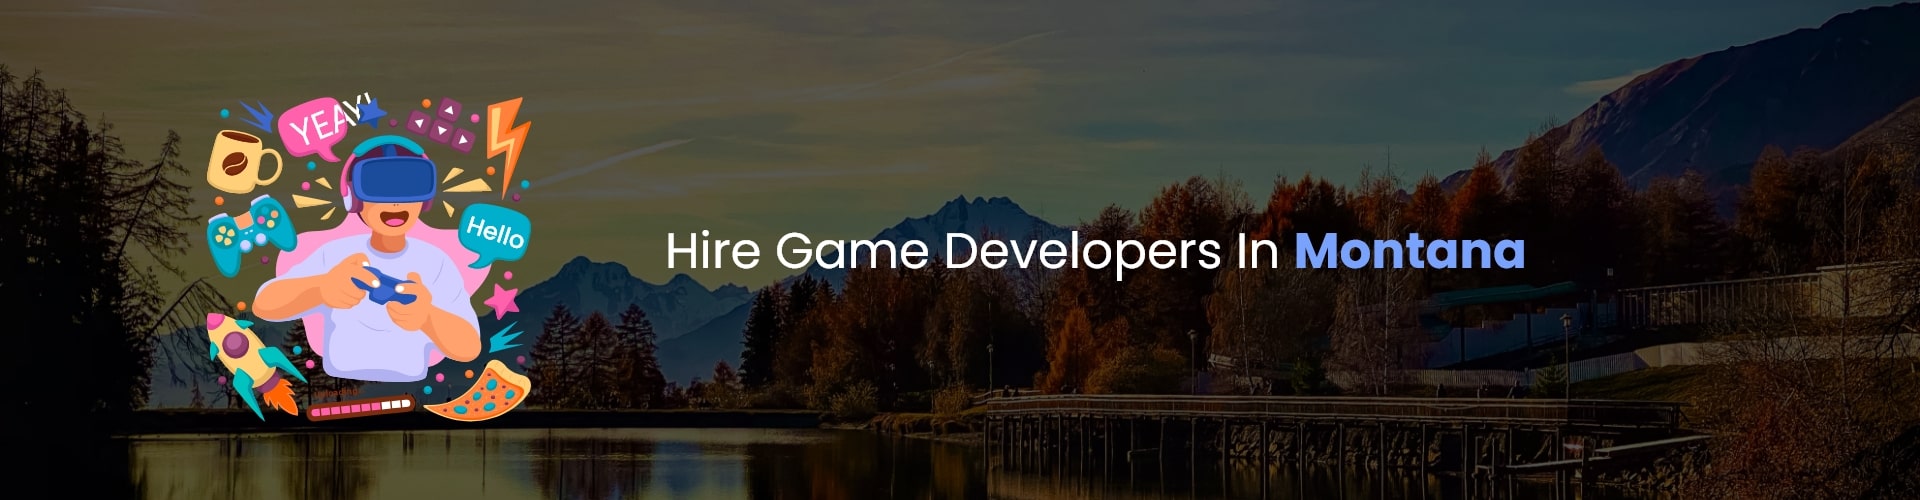 hire game developers in montana